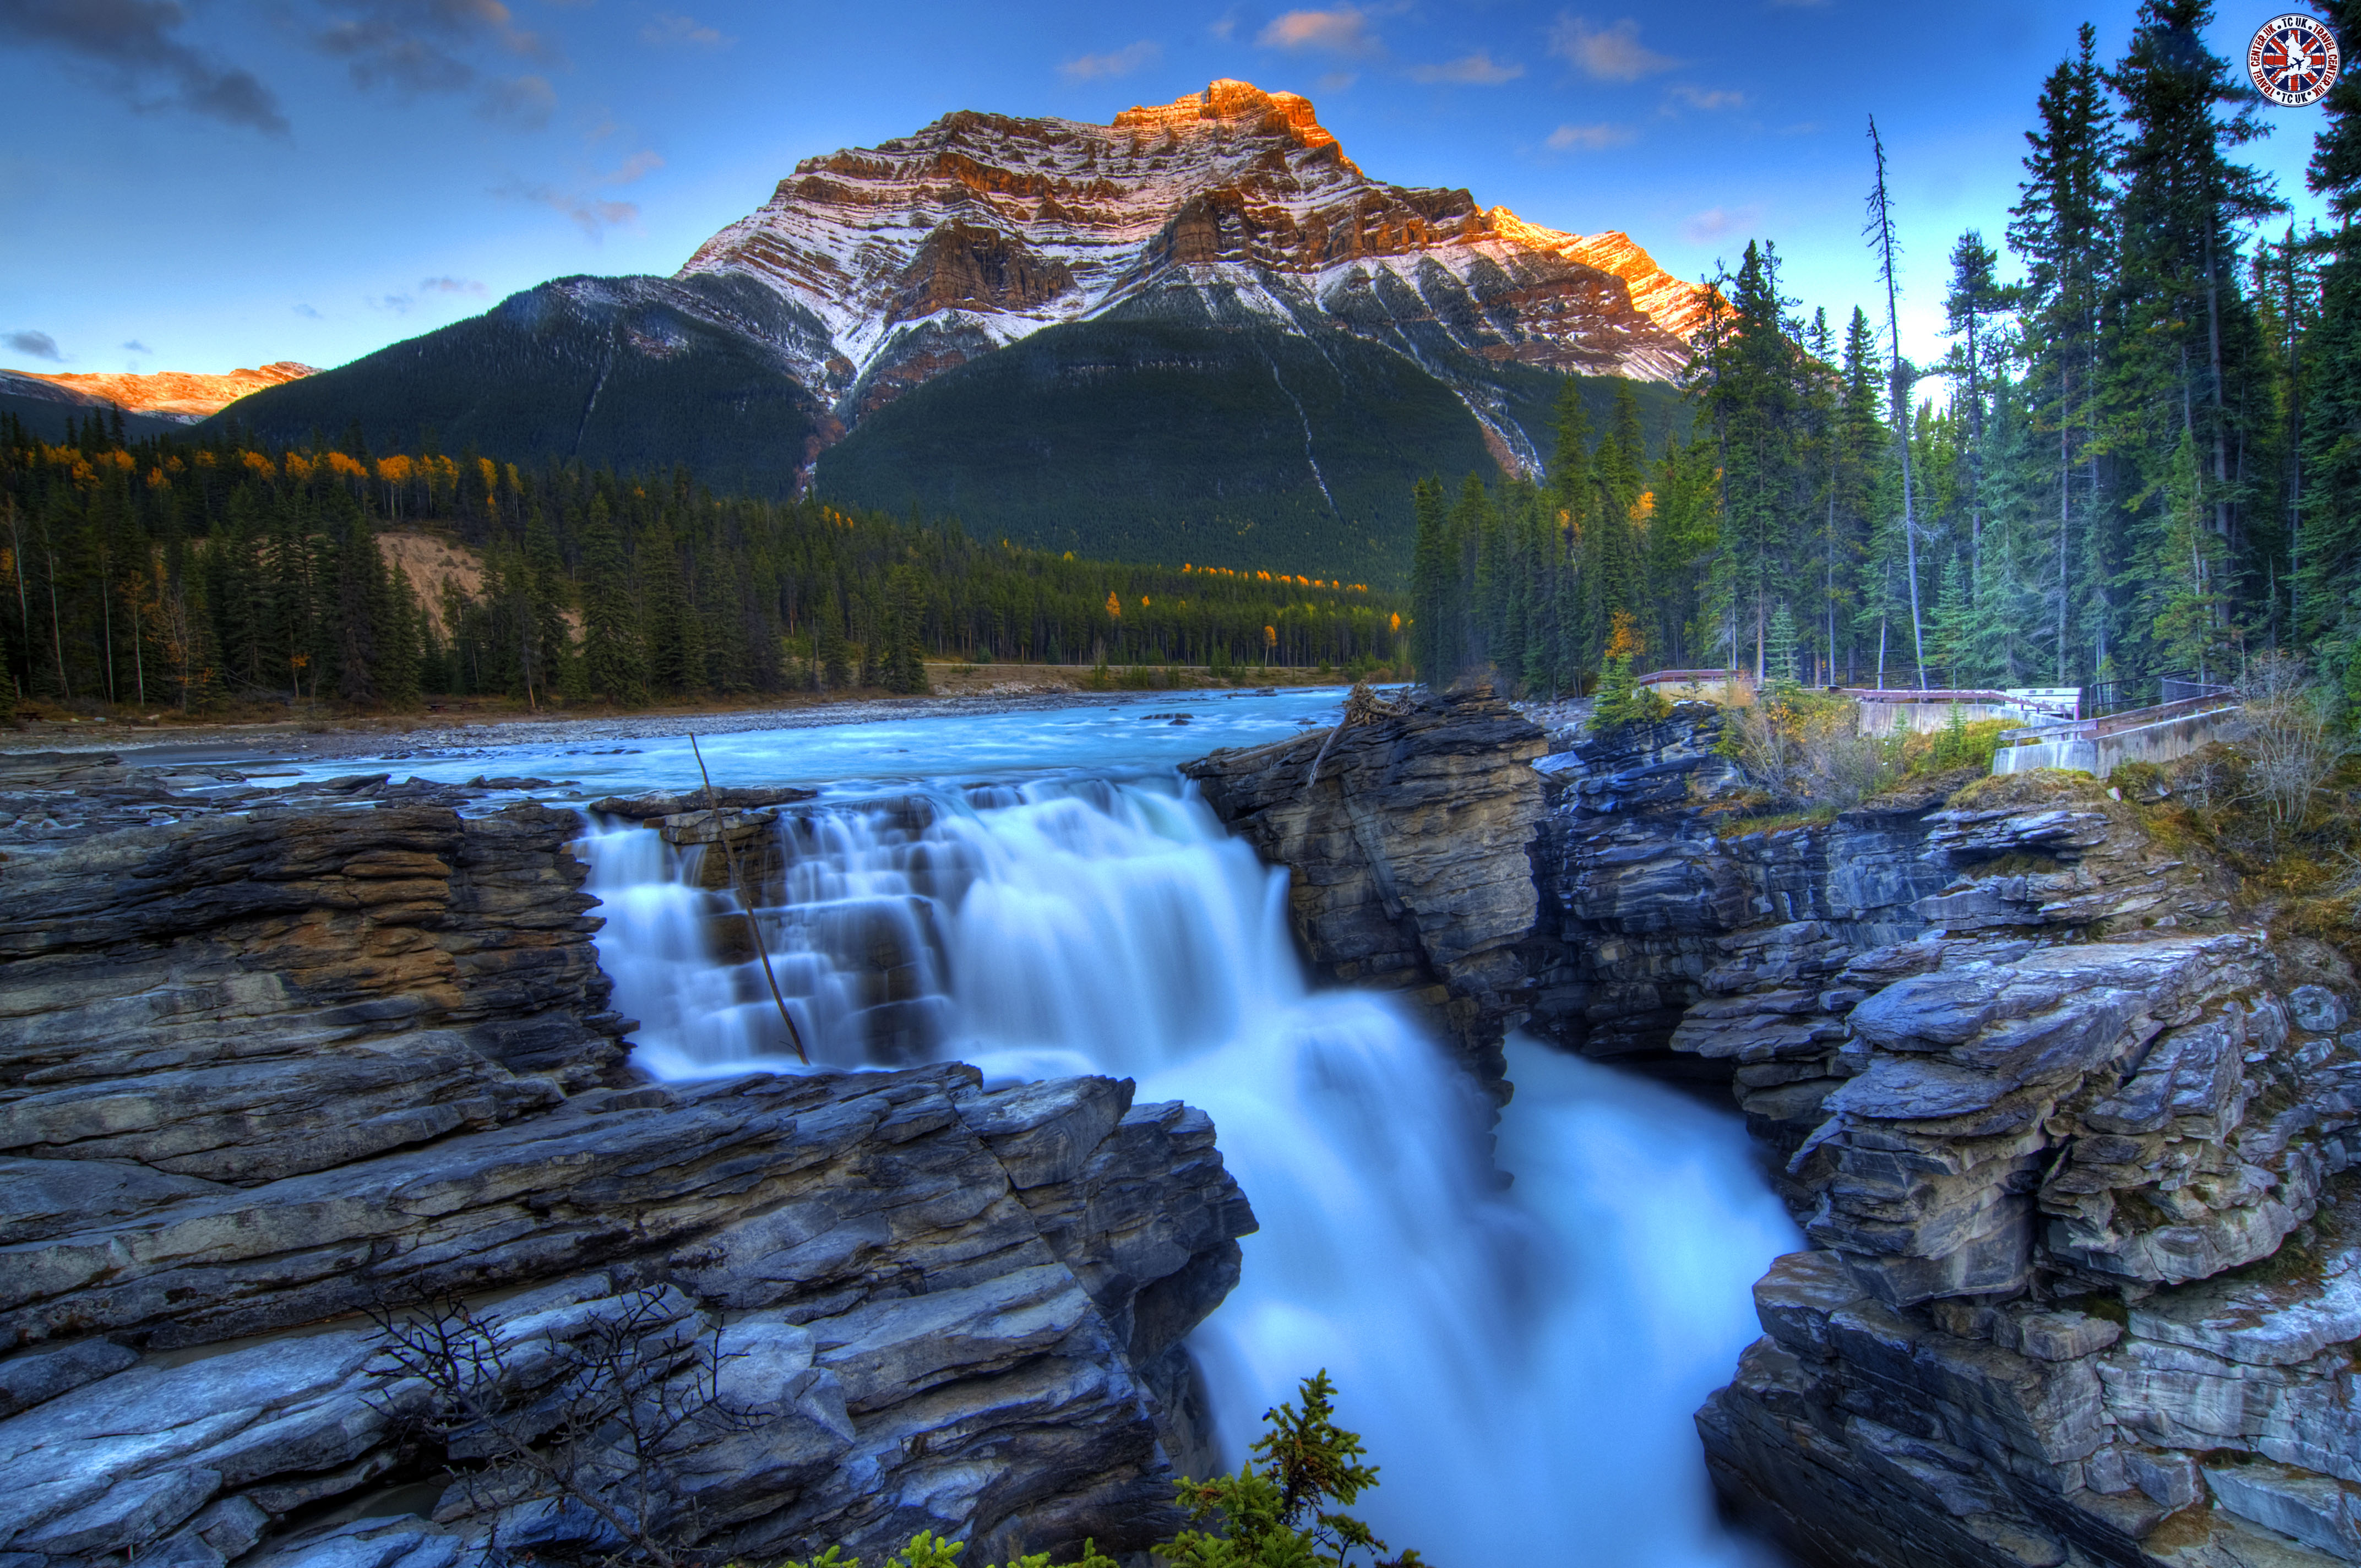 Wallpapers Waterfalls of Athabasca Jasper National Park Canada on the desktop